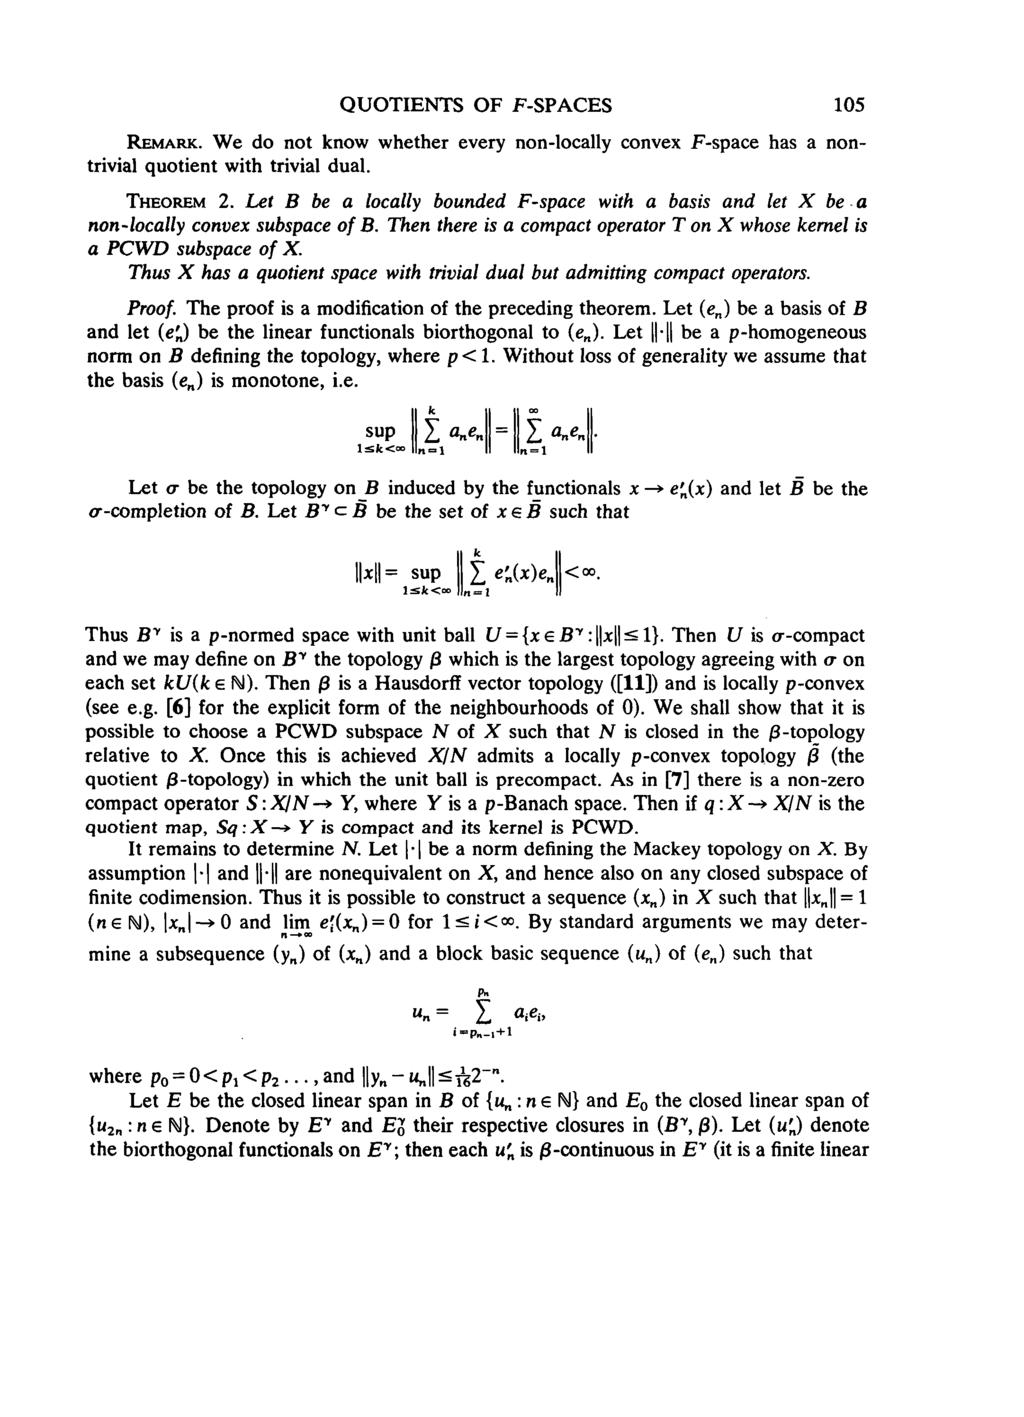 QUOTIENTS OF F-SPACES 105 REMARK. We do not know whether every non-locally convex F-space has a nontrivial quotient with trivial dual. THEOREM 2.